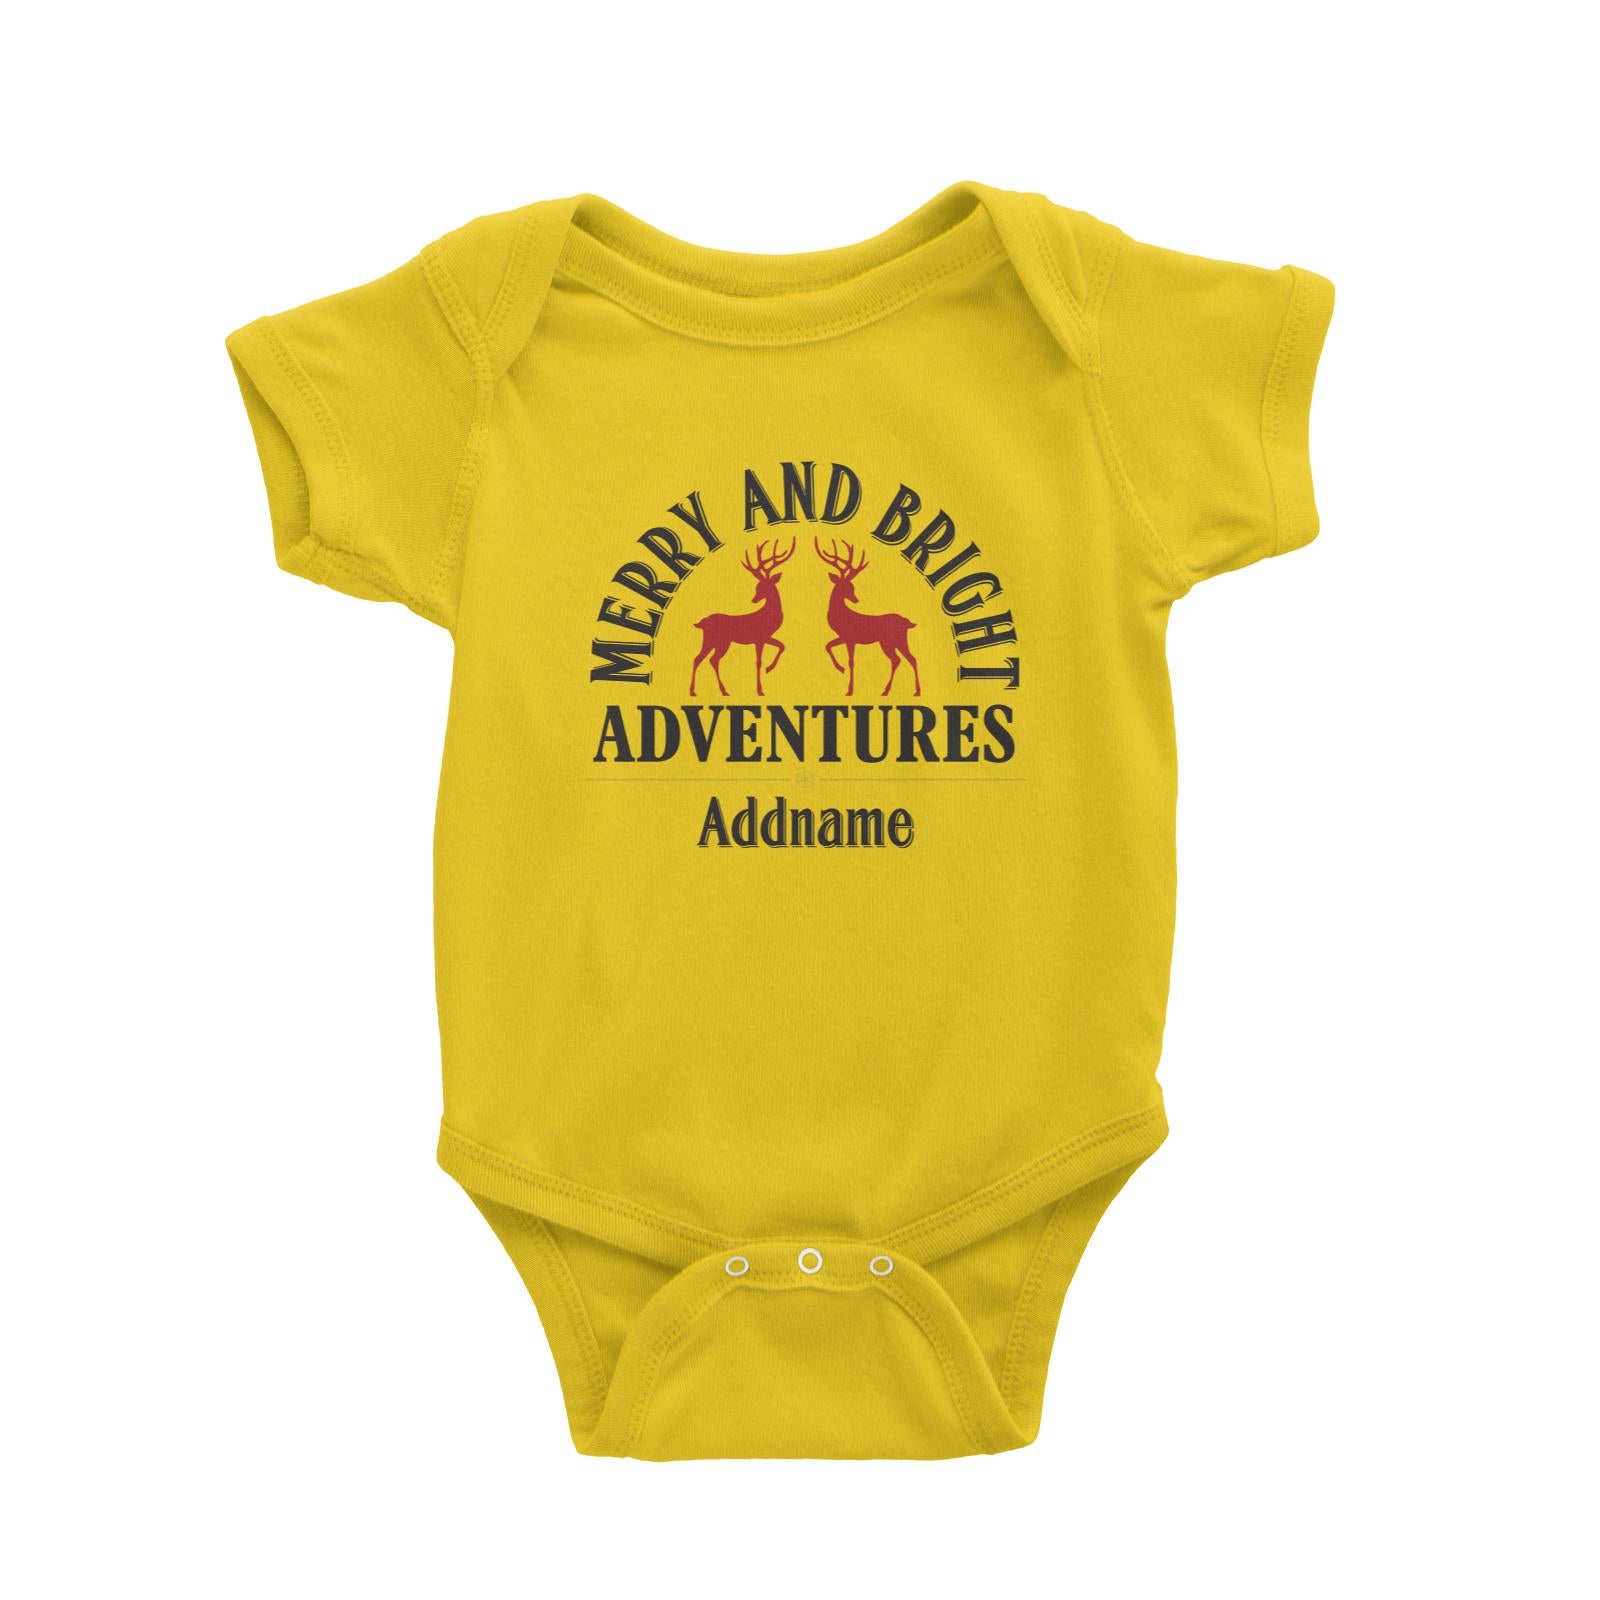 Xmas Merry and Bright Adventures with Reindeers Baby Romper